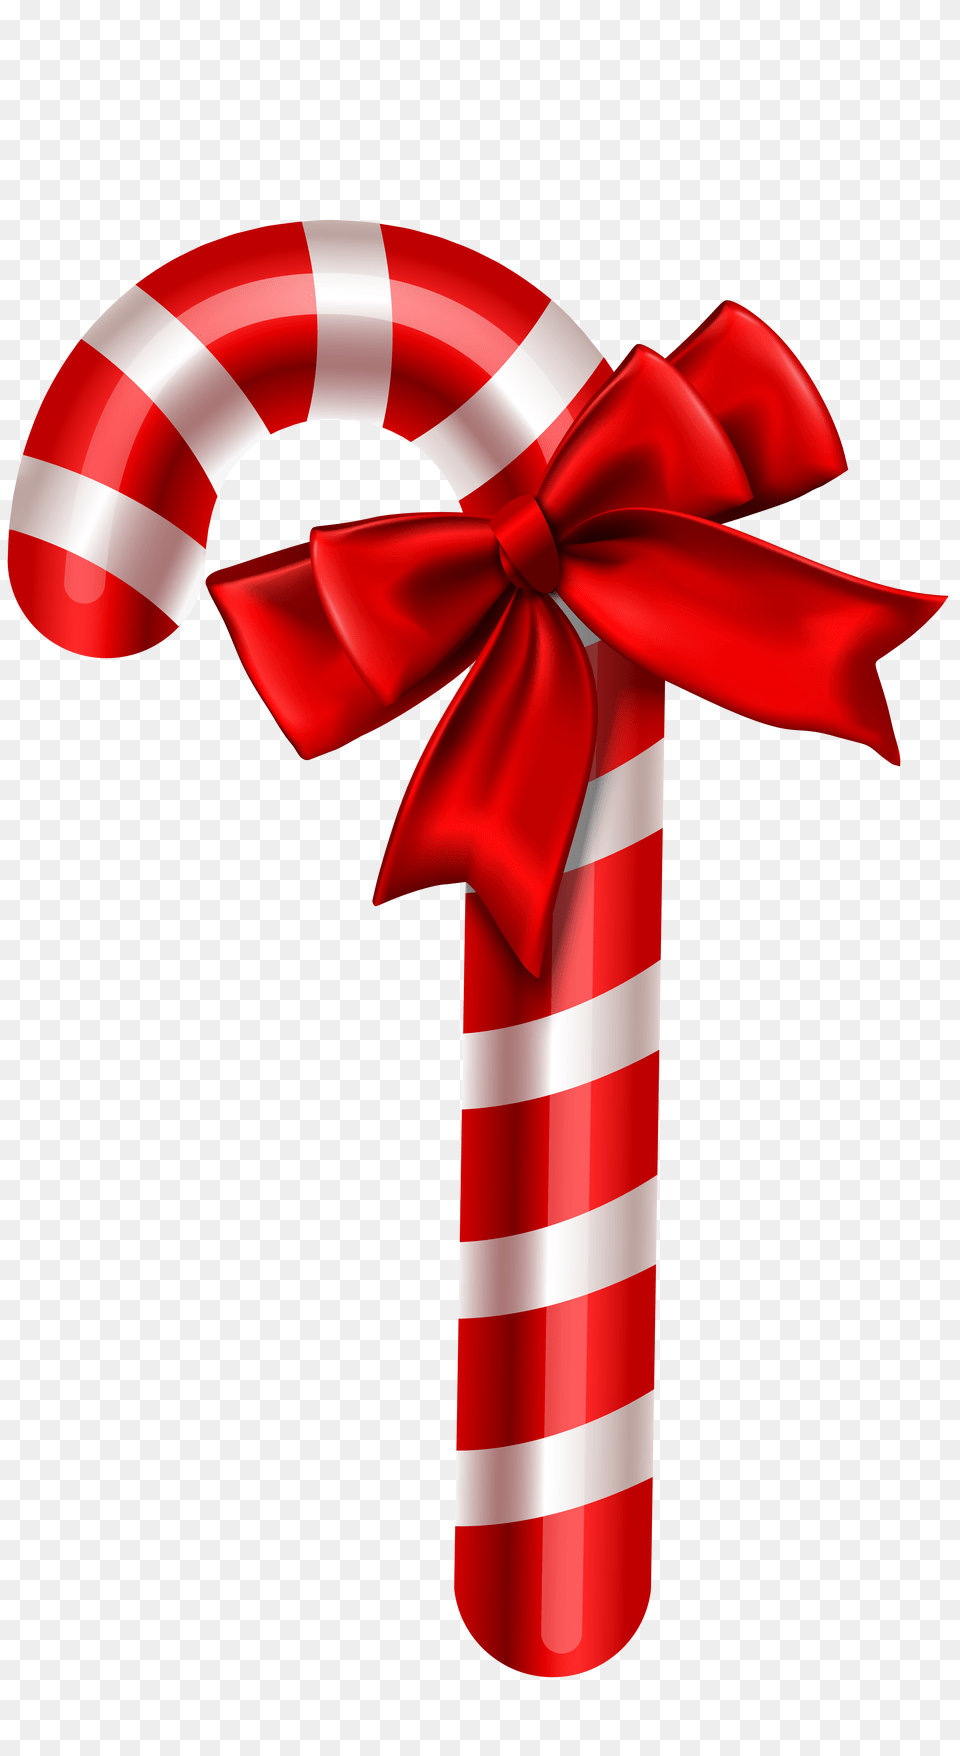 Christmas Candy, Food, Sweets, Dynamite, Weapon Png